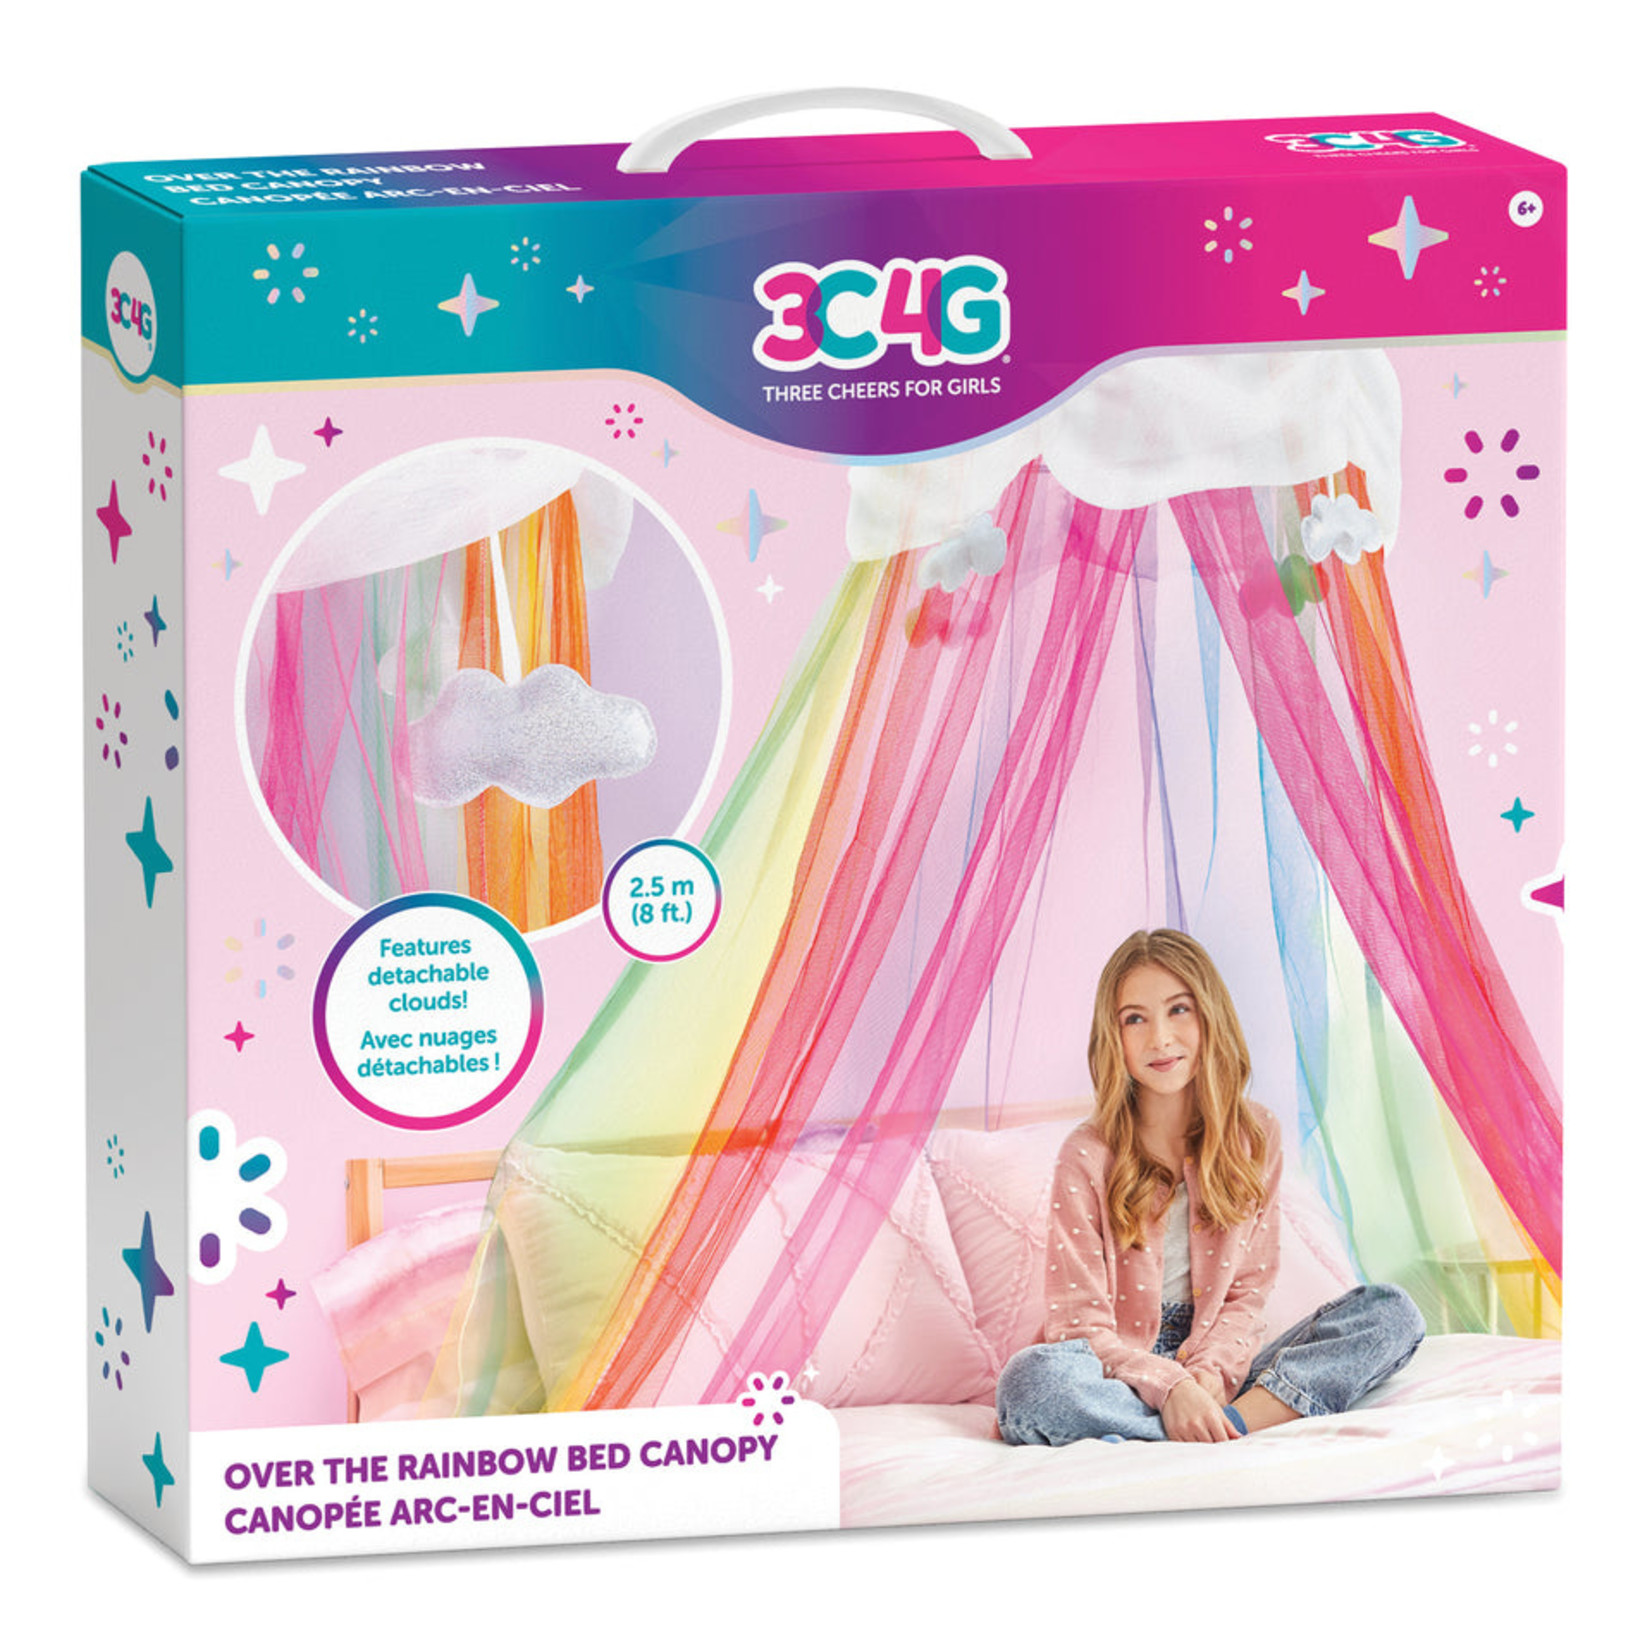 Make It Real Rainbow Bright Bed Canopy